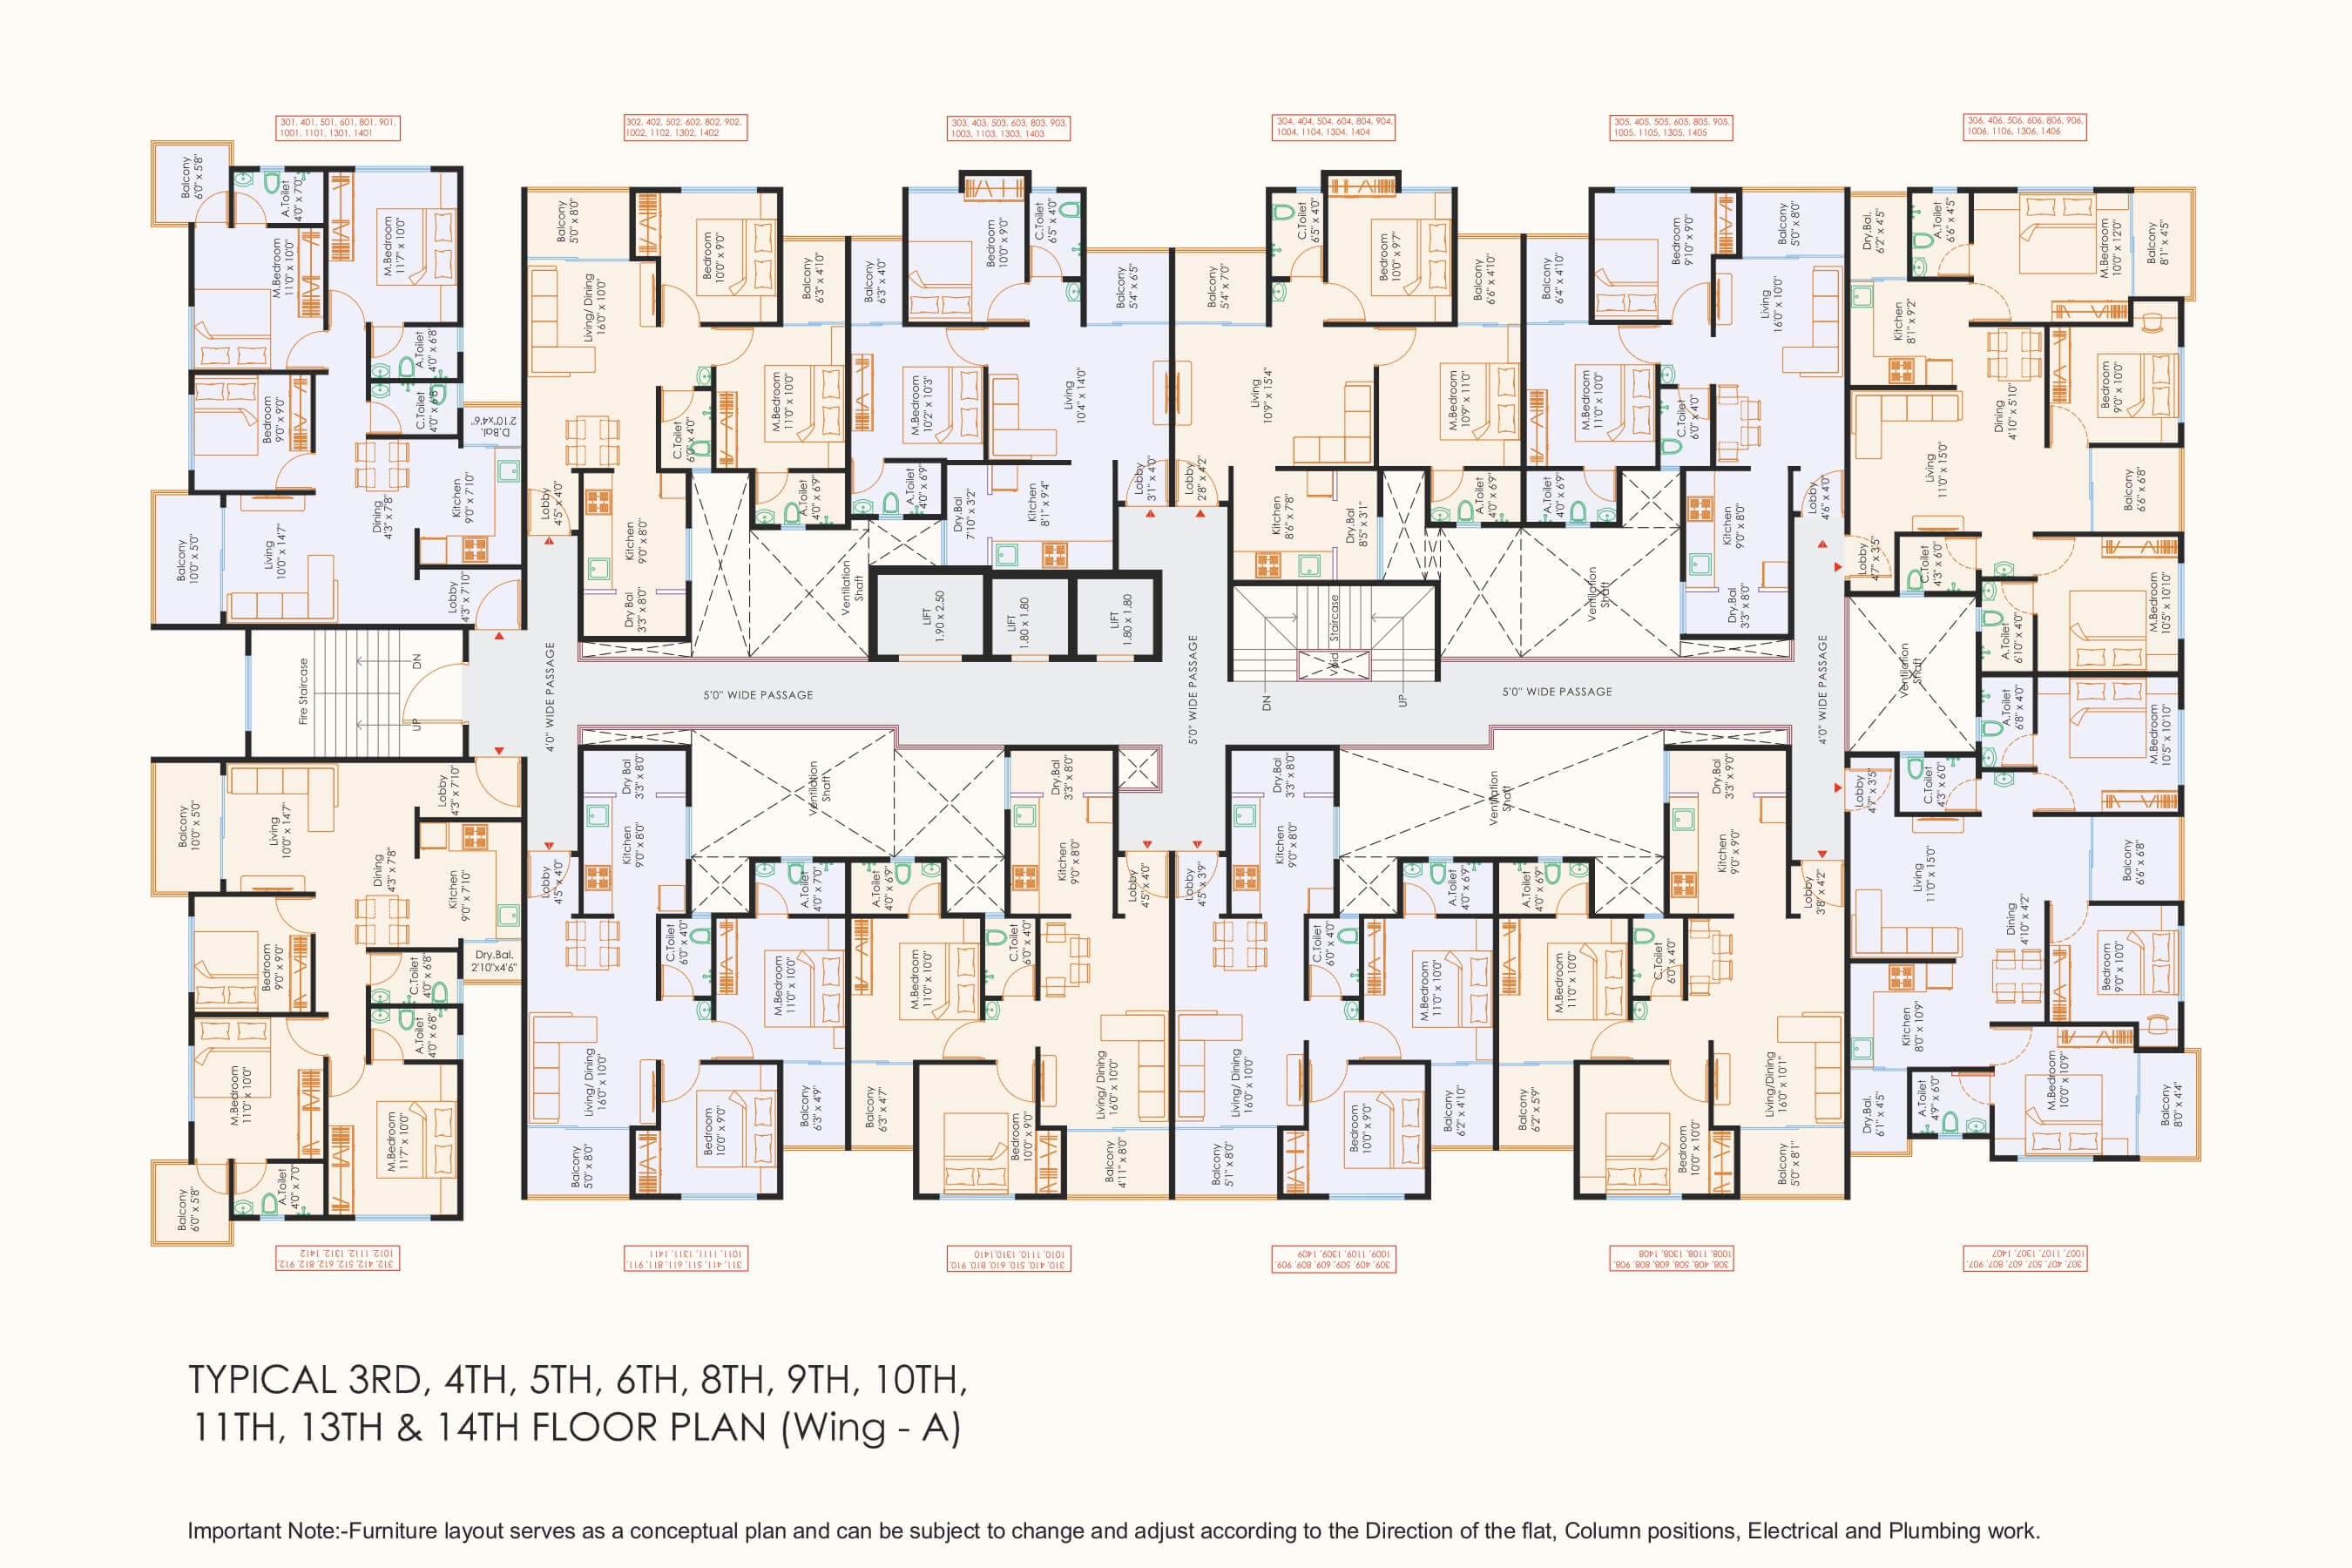 1st Floor Plan Wing-A